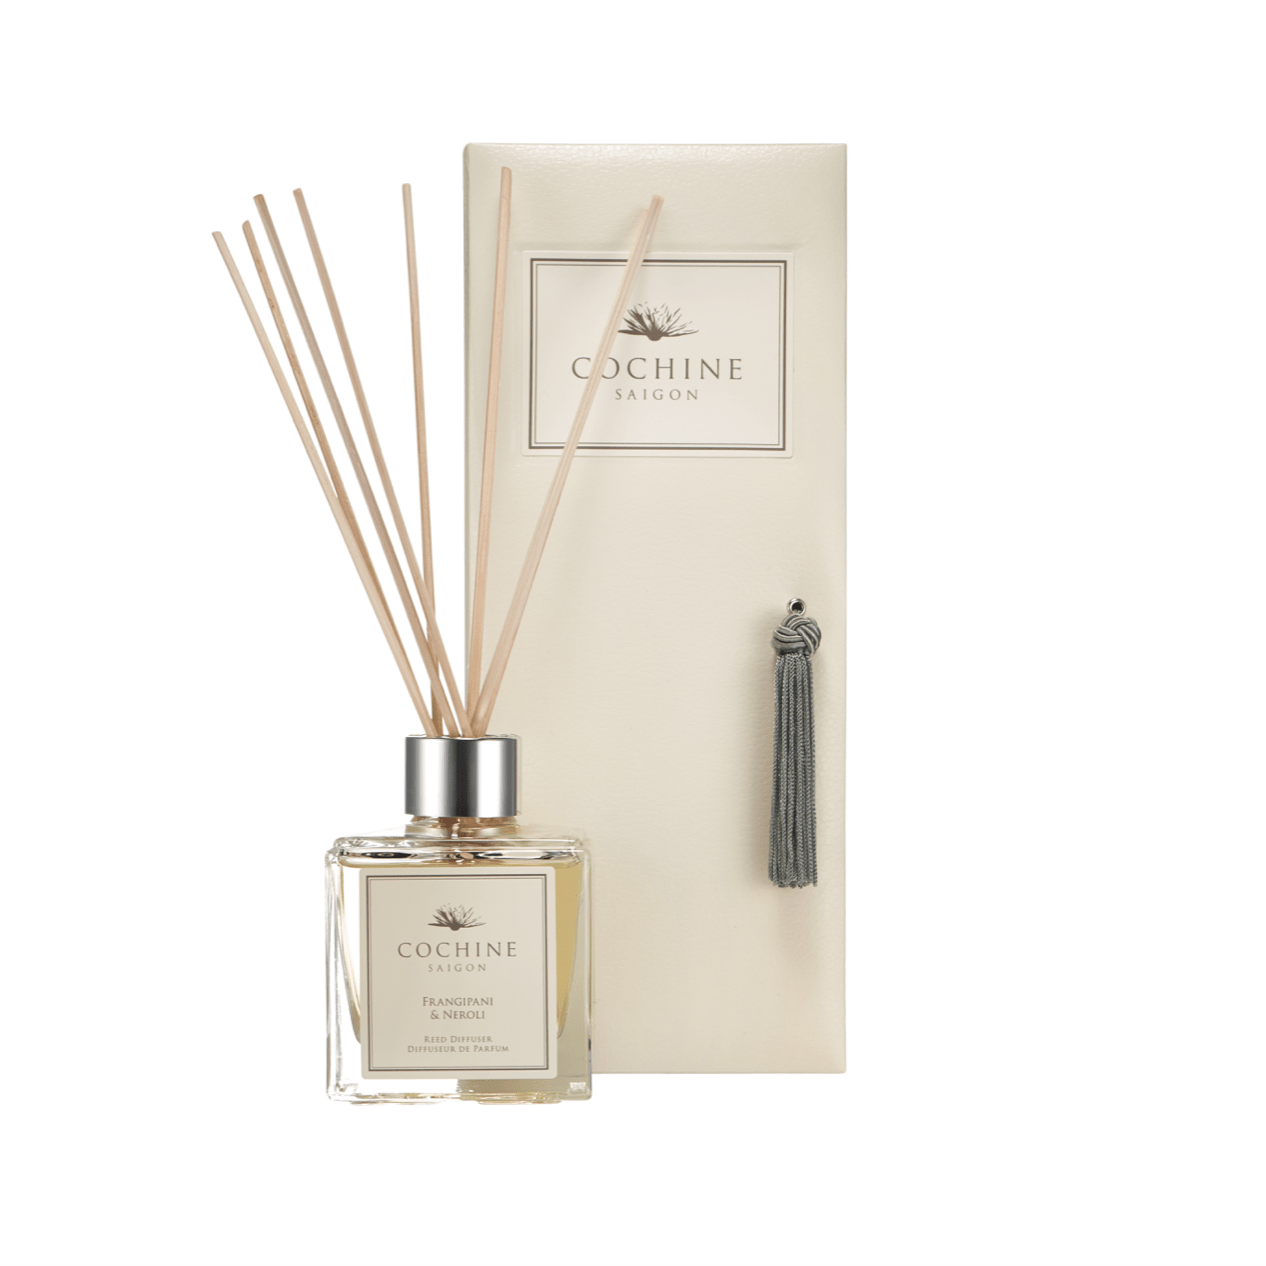 Artificial flowers luxury faux silk frangipani & neroli reed diffuser with box lifelike realistic faux flowers buy online from Amaranthine Blooms UK